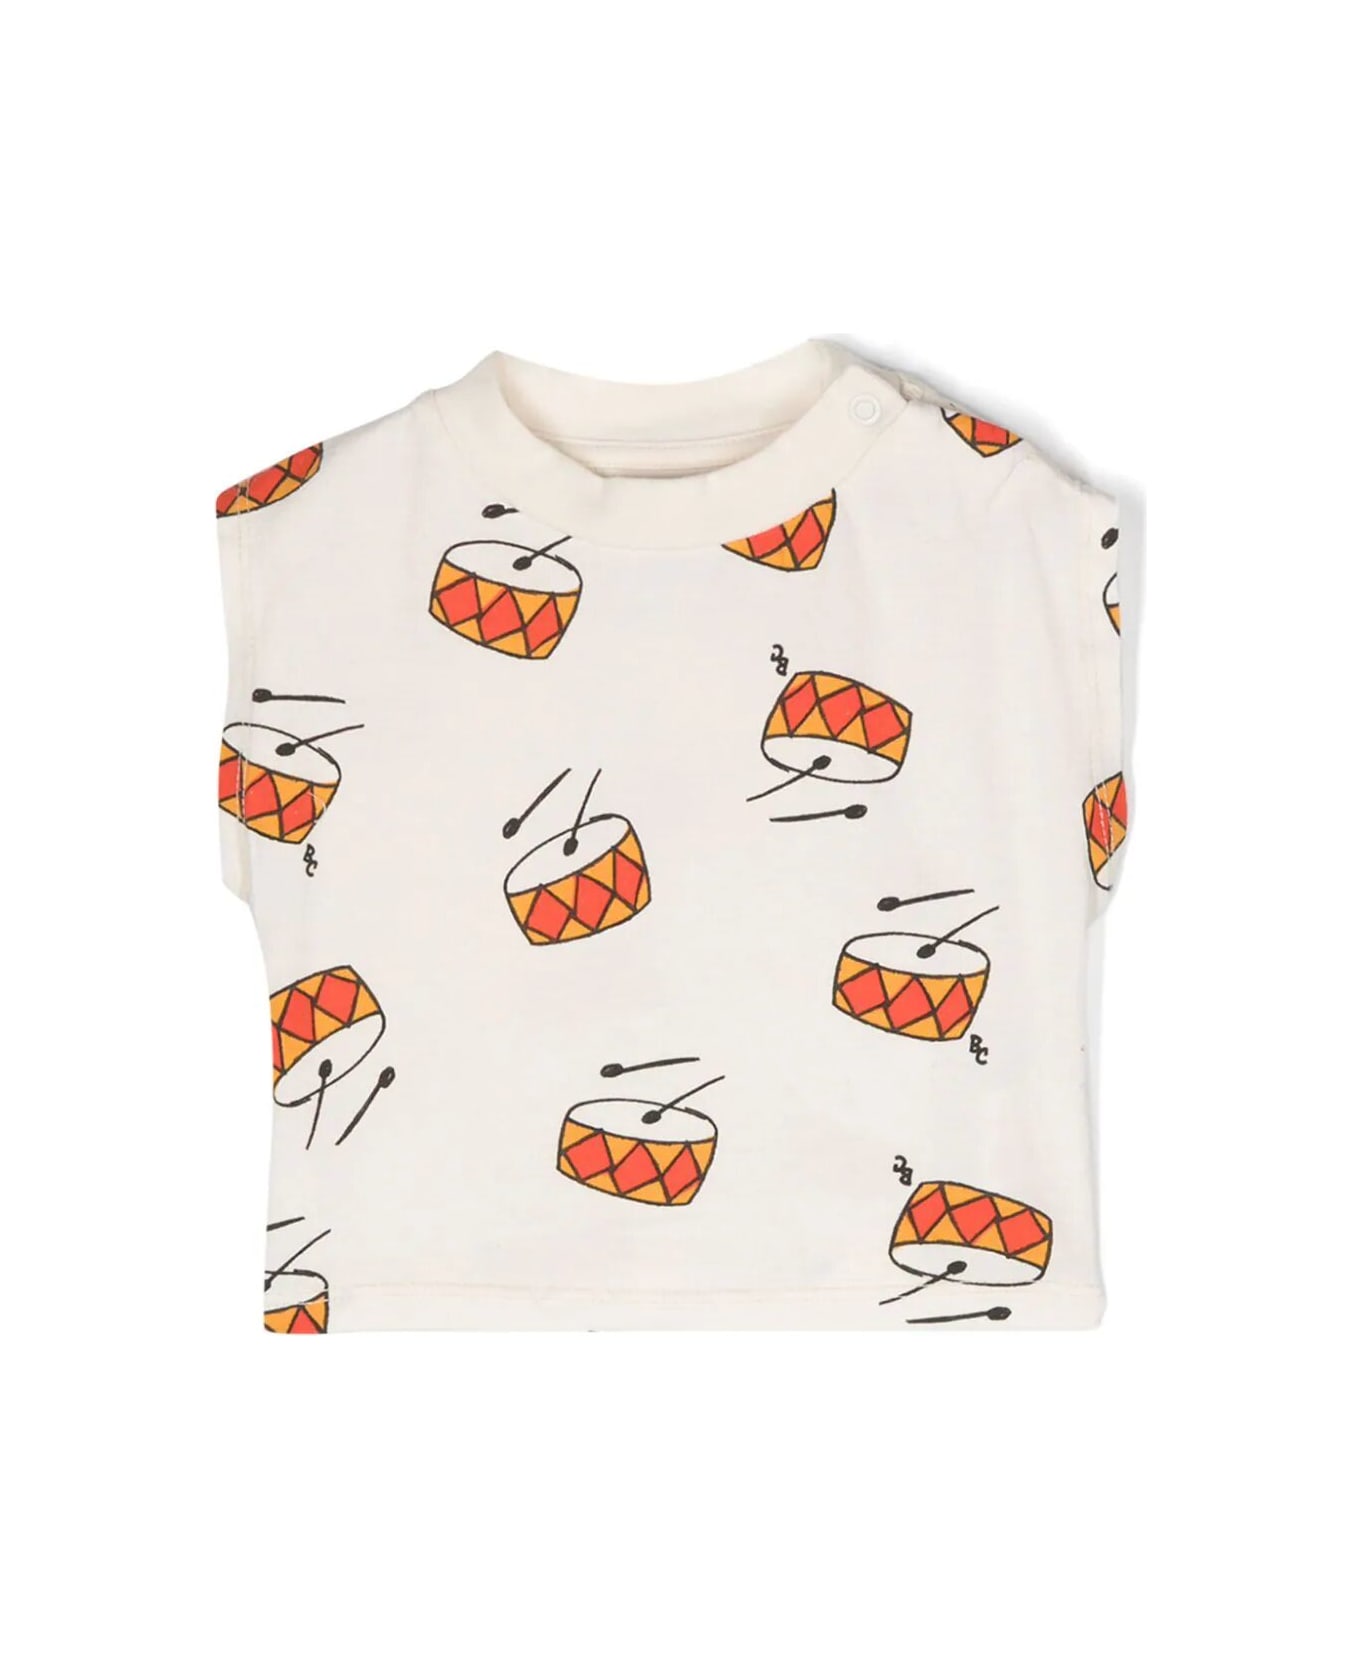 Bobo Choses Baby Play The Drum All Over T-shirt - Off White